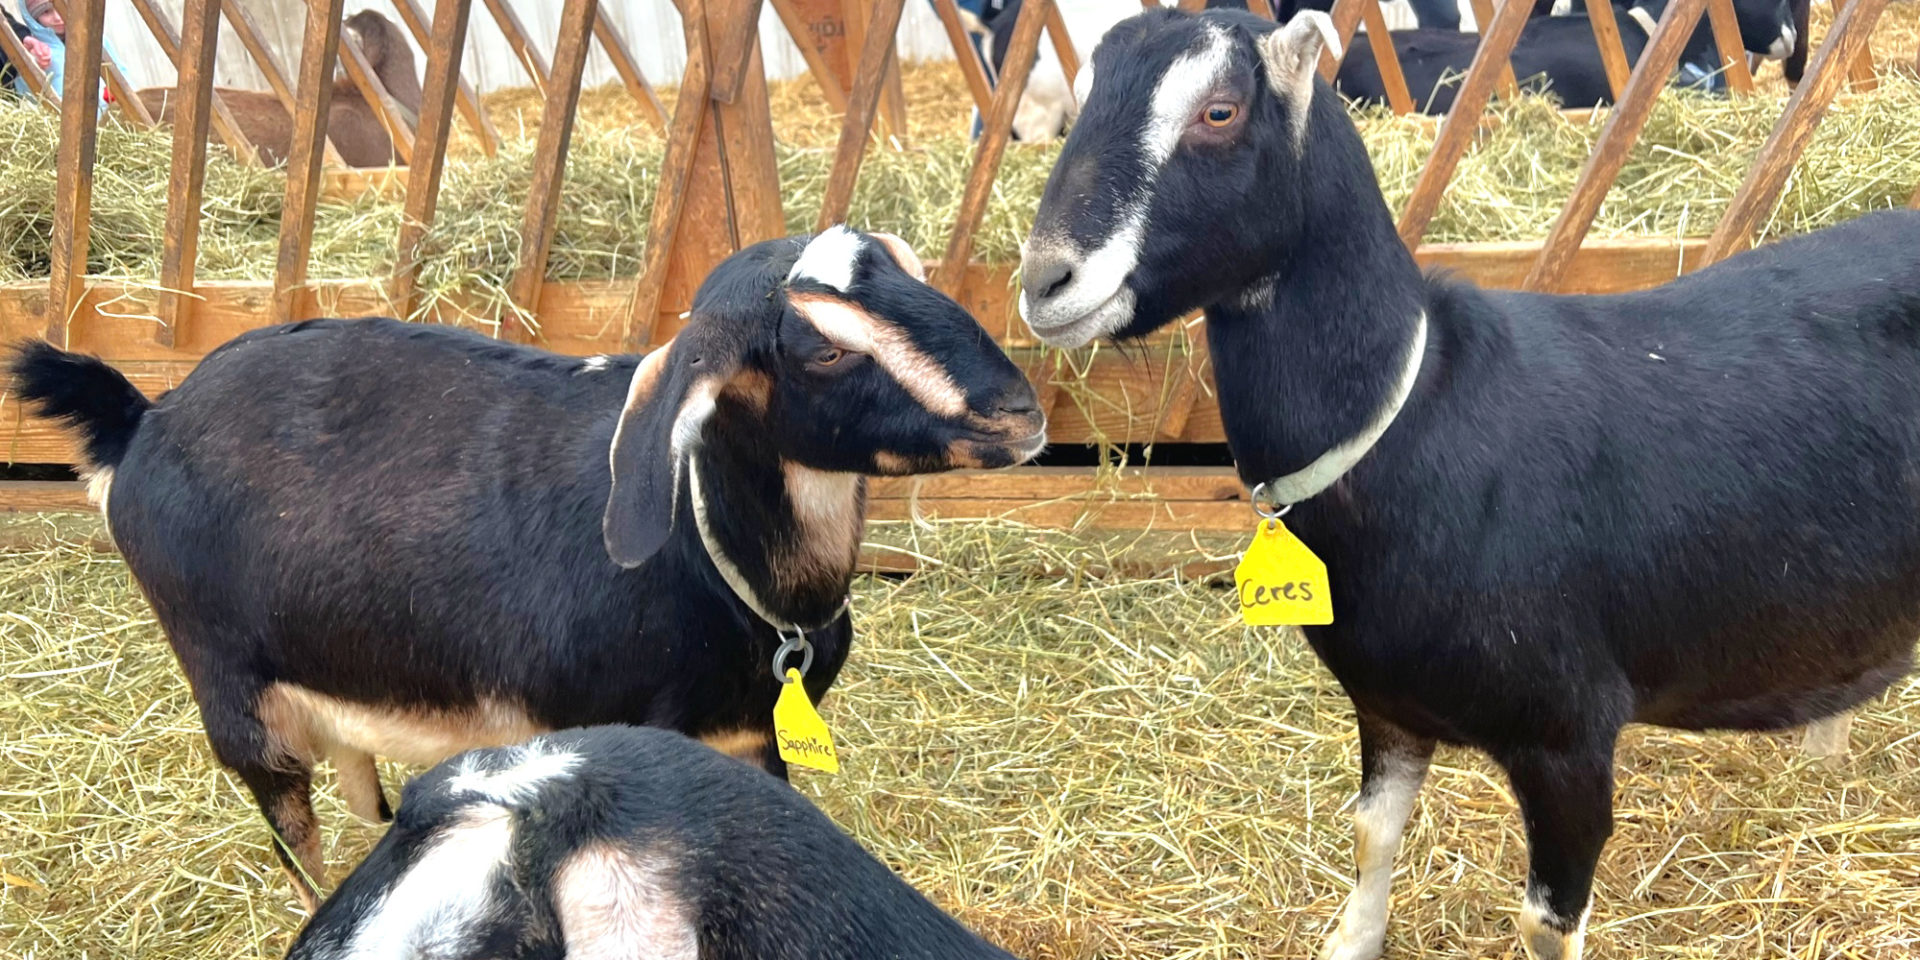 Two goats at Prairie Fruits Farm are playful in a pen lined with hay in Champaign, Illinois. Photo by Alyssa Buckley.